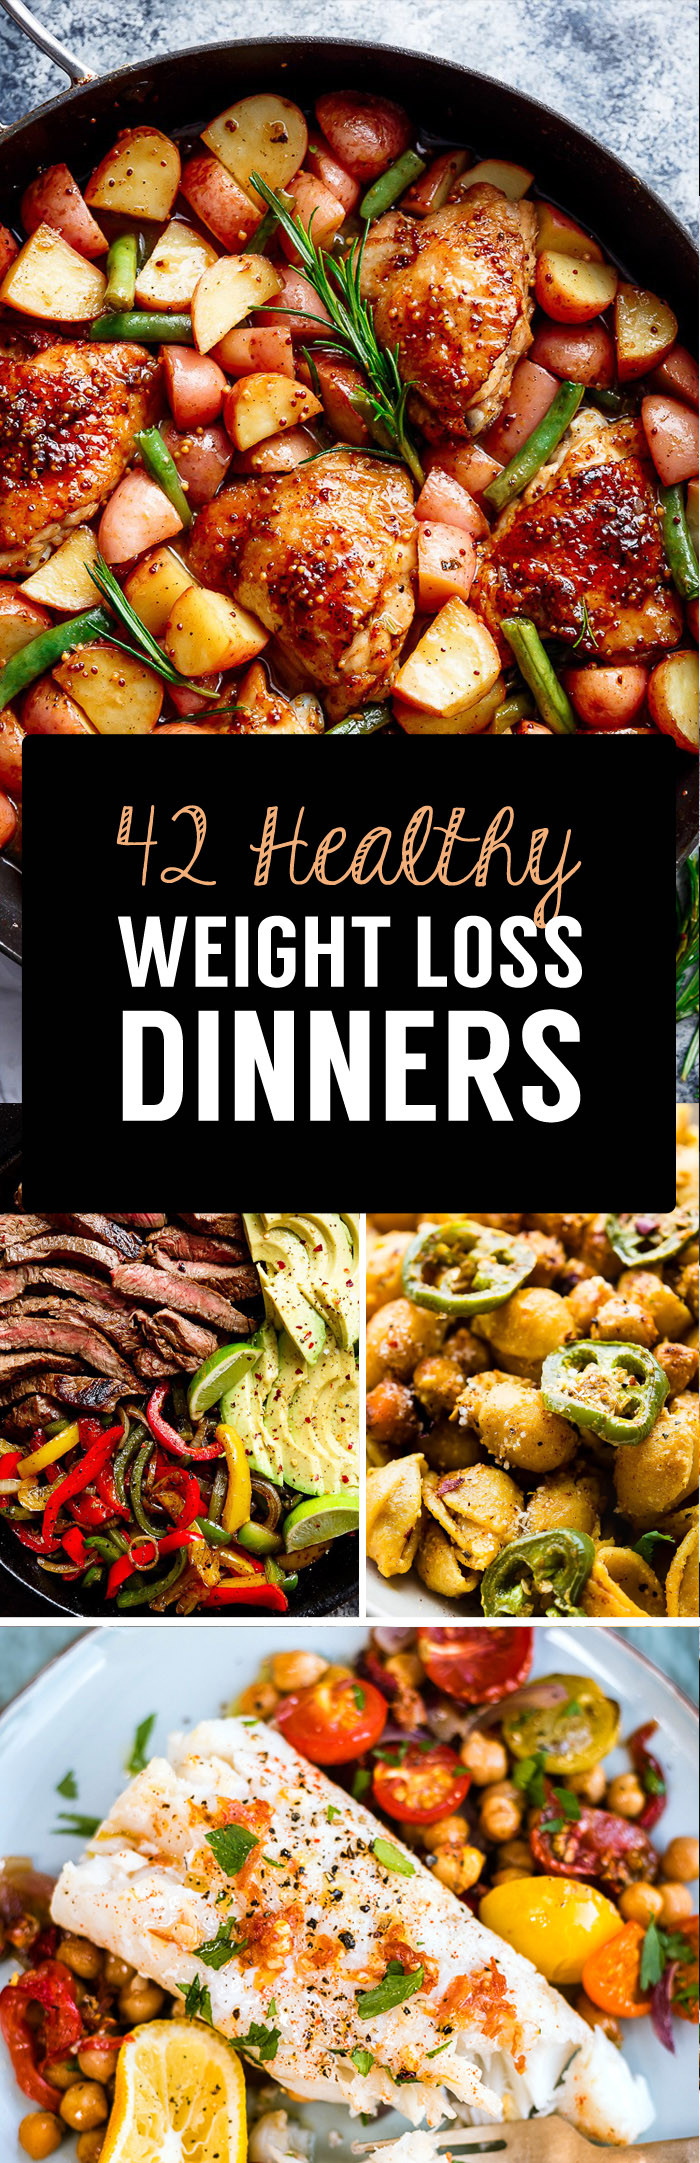 Healthy Weight Loss Dinners
 117 Weight Loss Meal Recipes For Every Time The Day